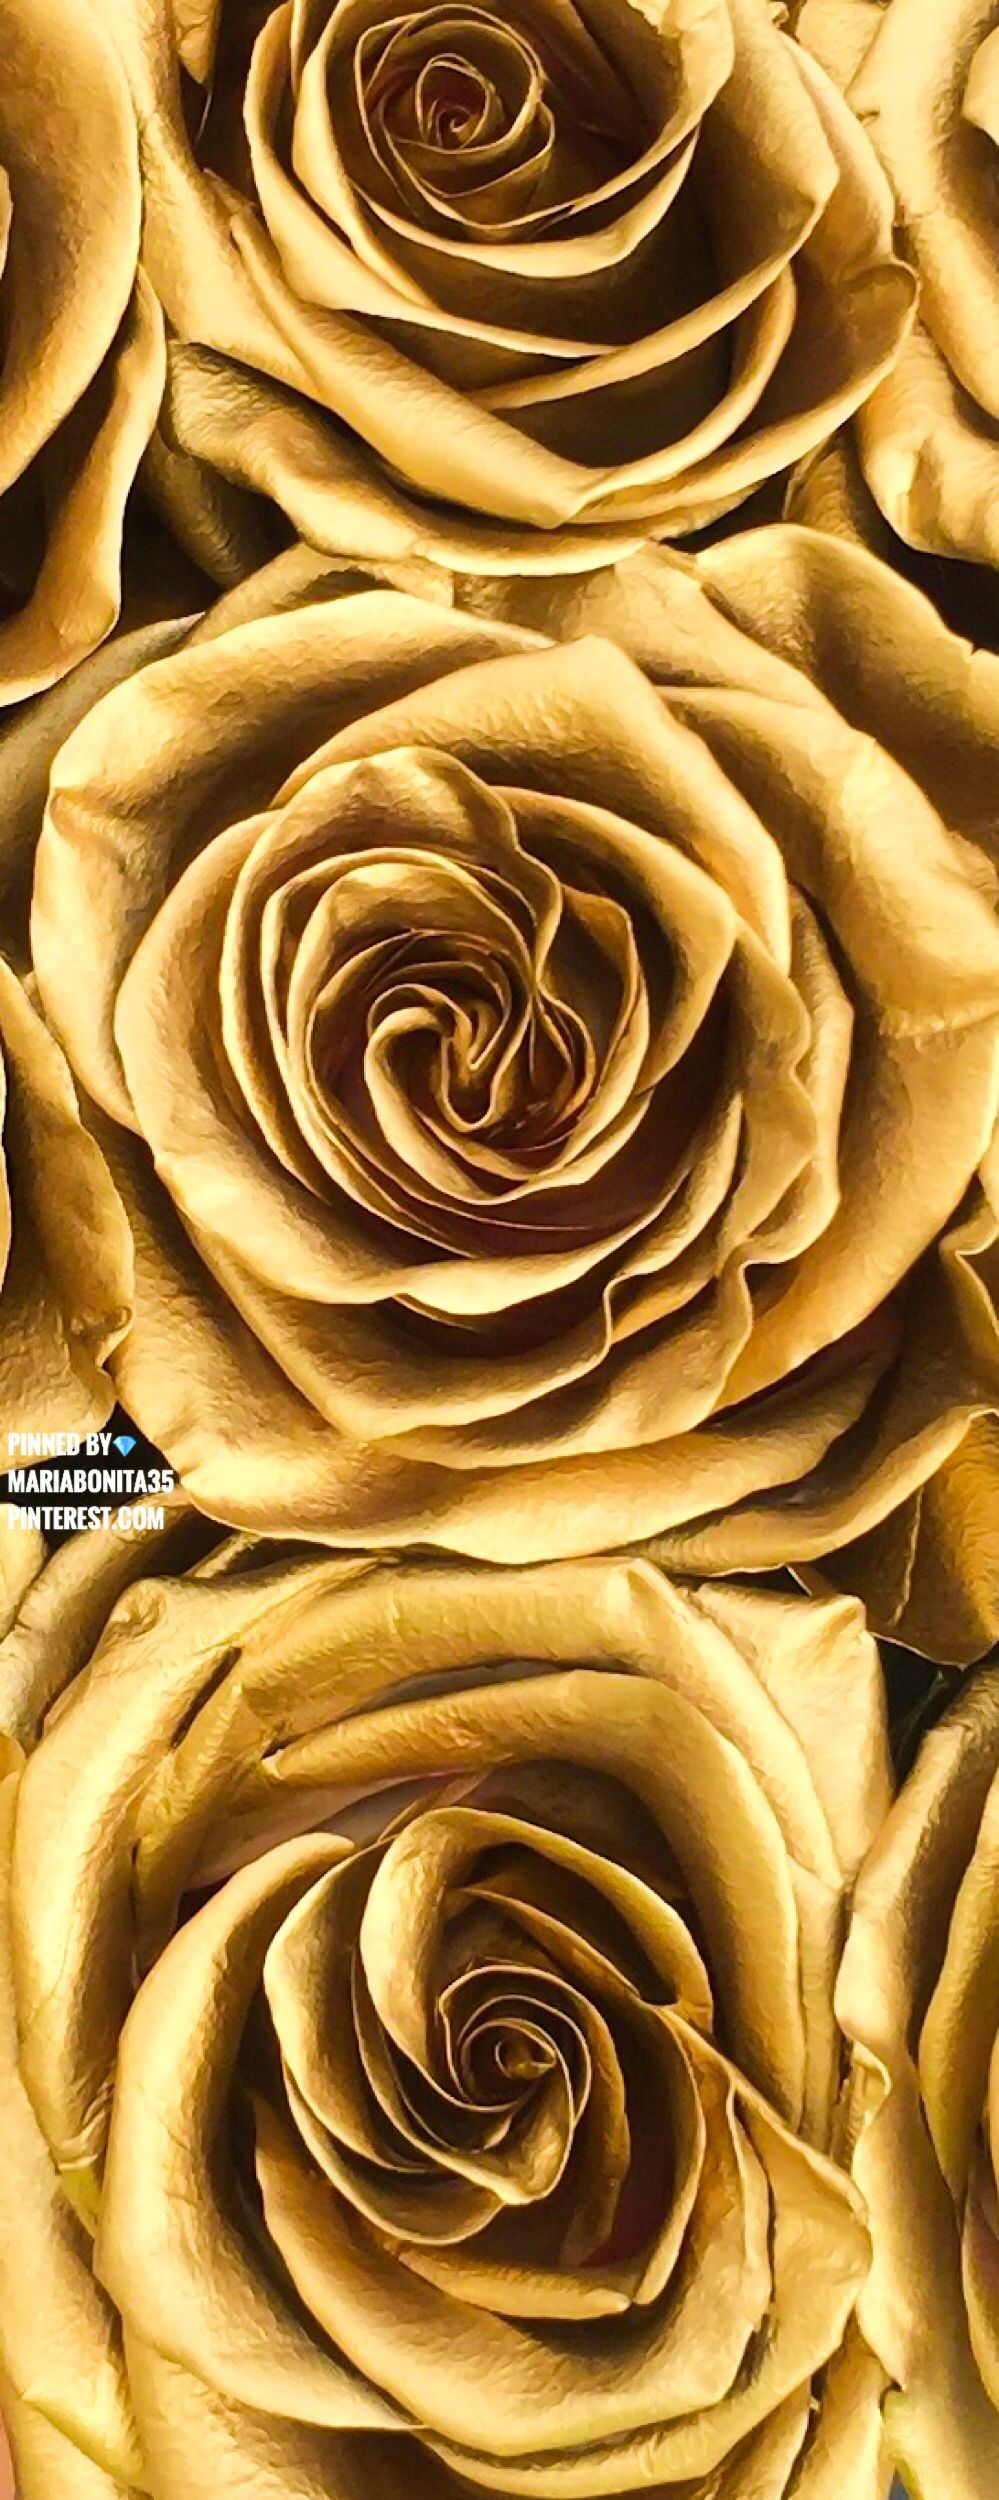 A close up of some gold roses - Gold